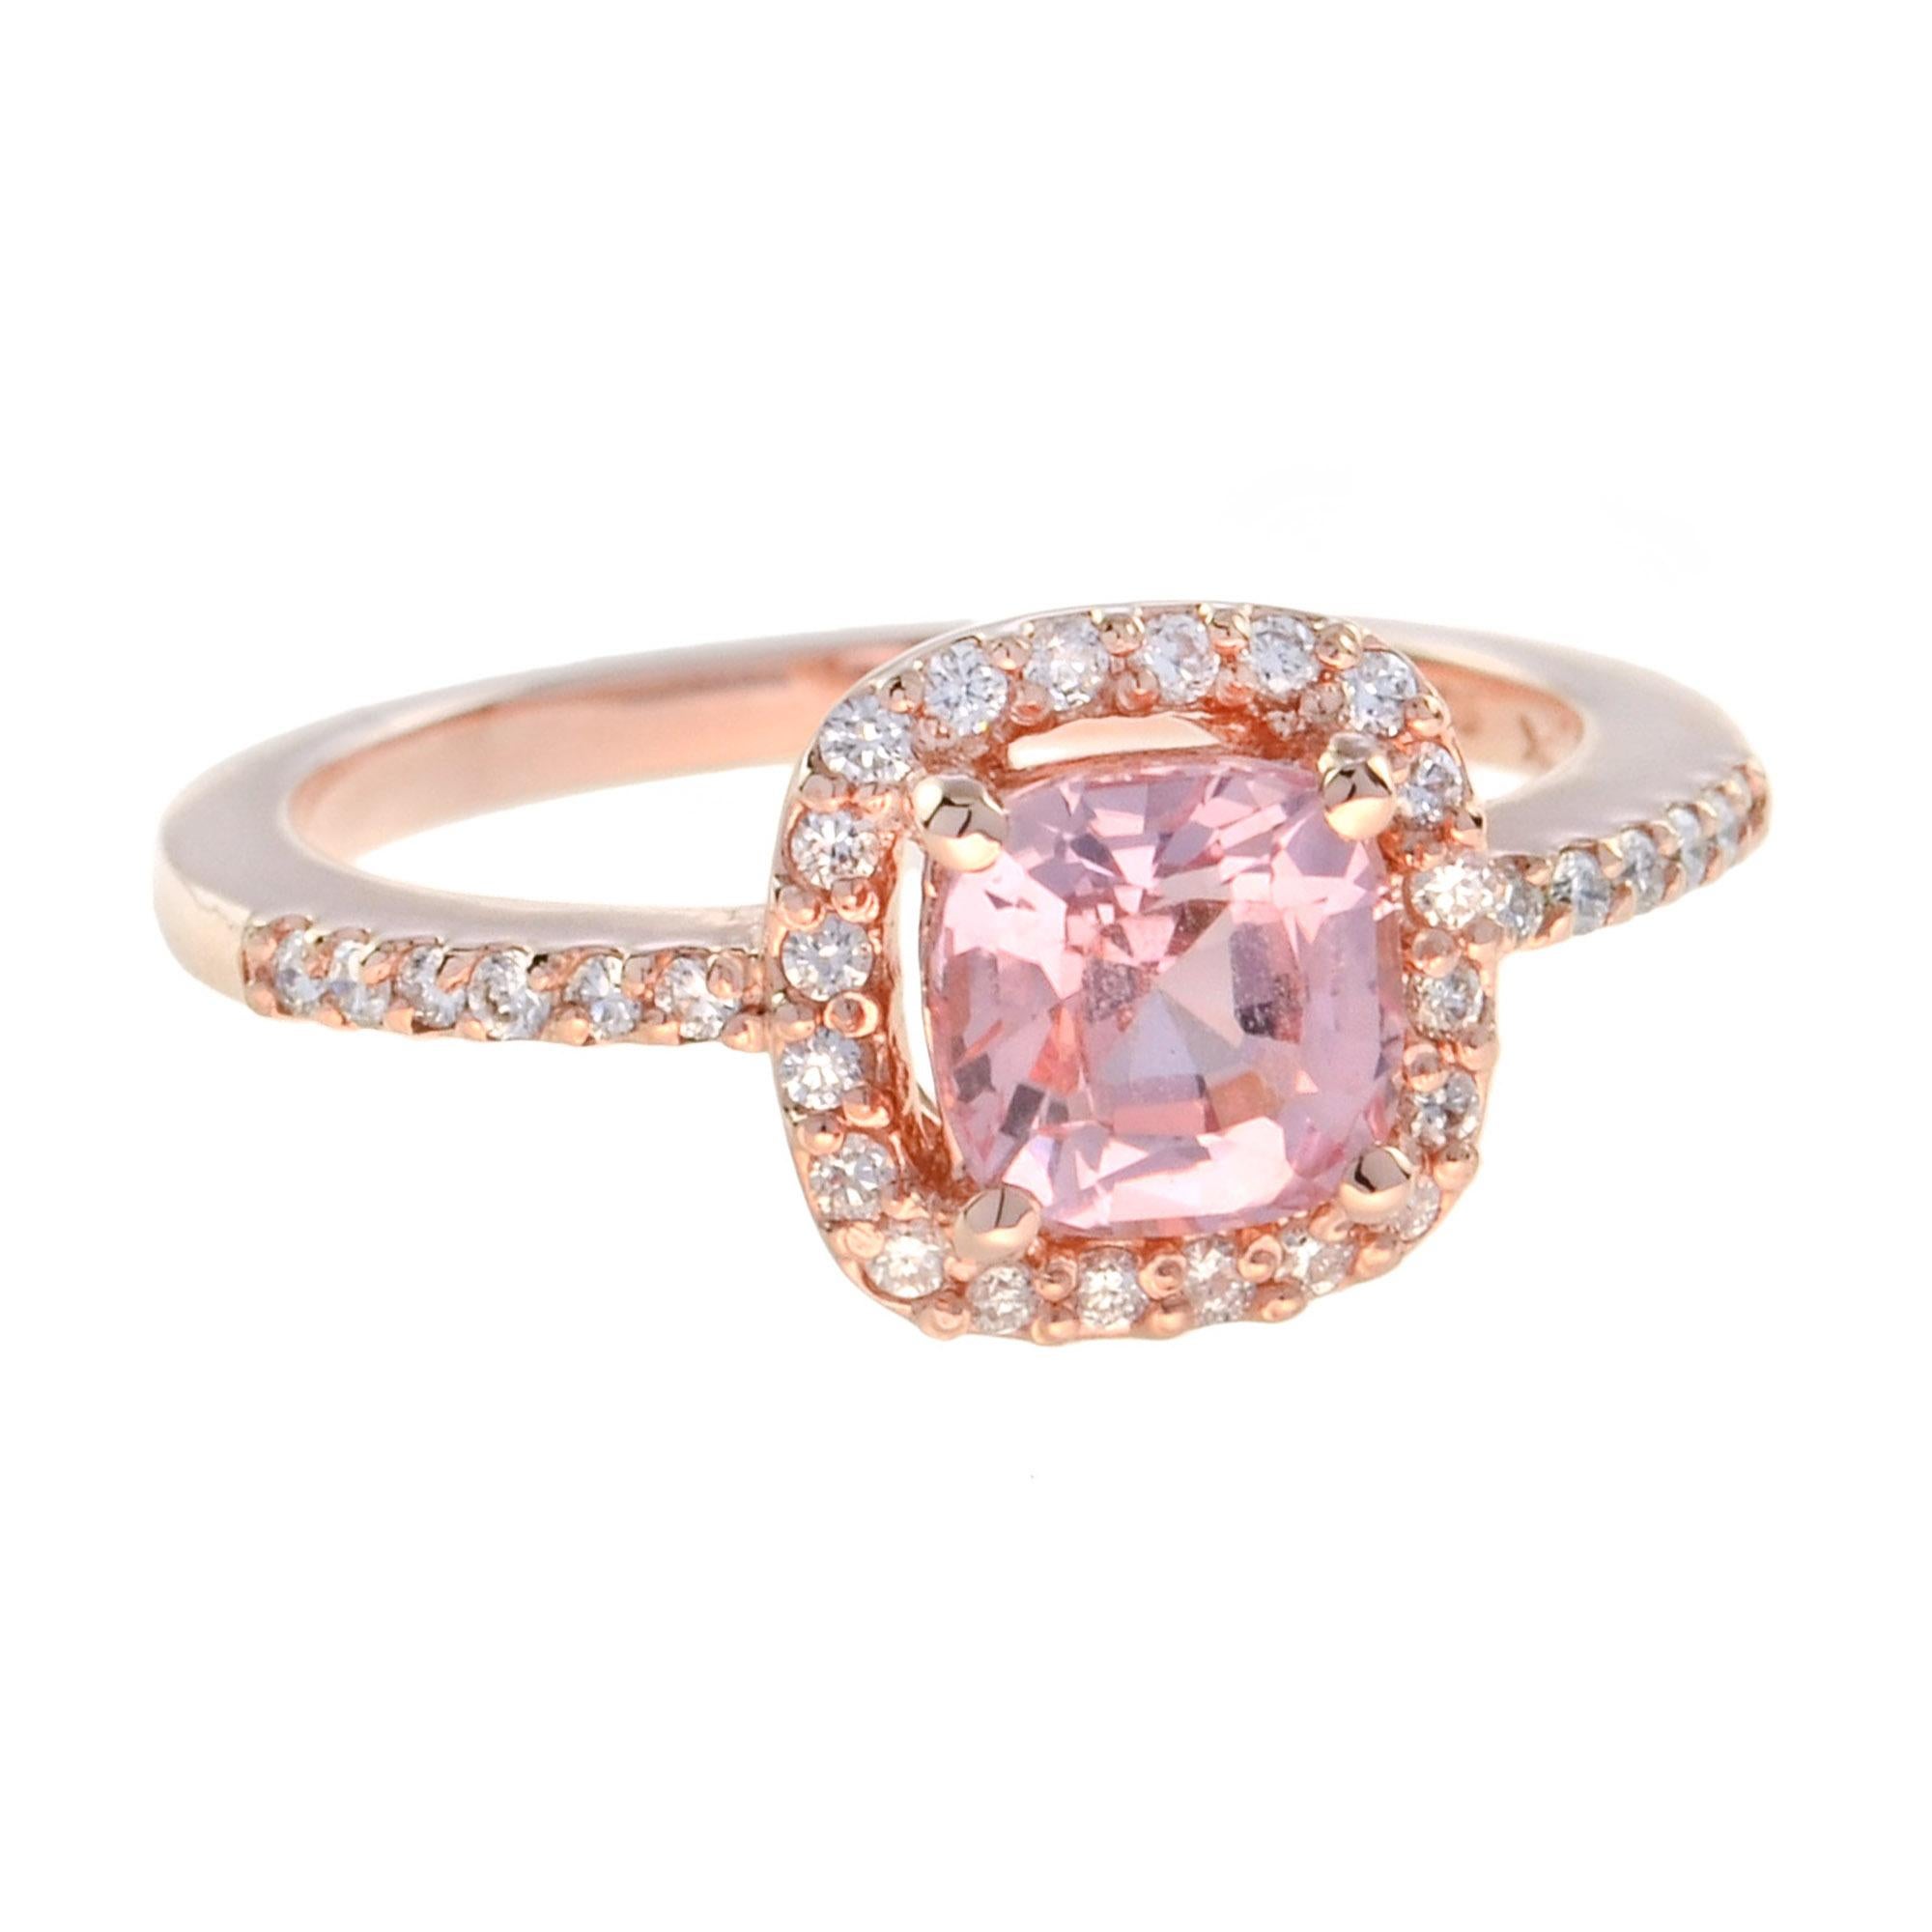 For Sale:  Halona Cushion Morganite and Diamond Halo Ring in 14K Rose Gold 3